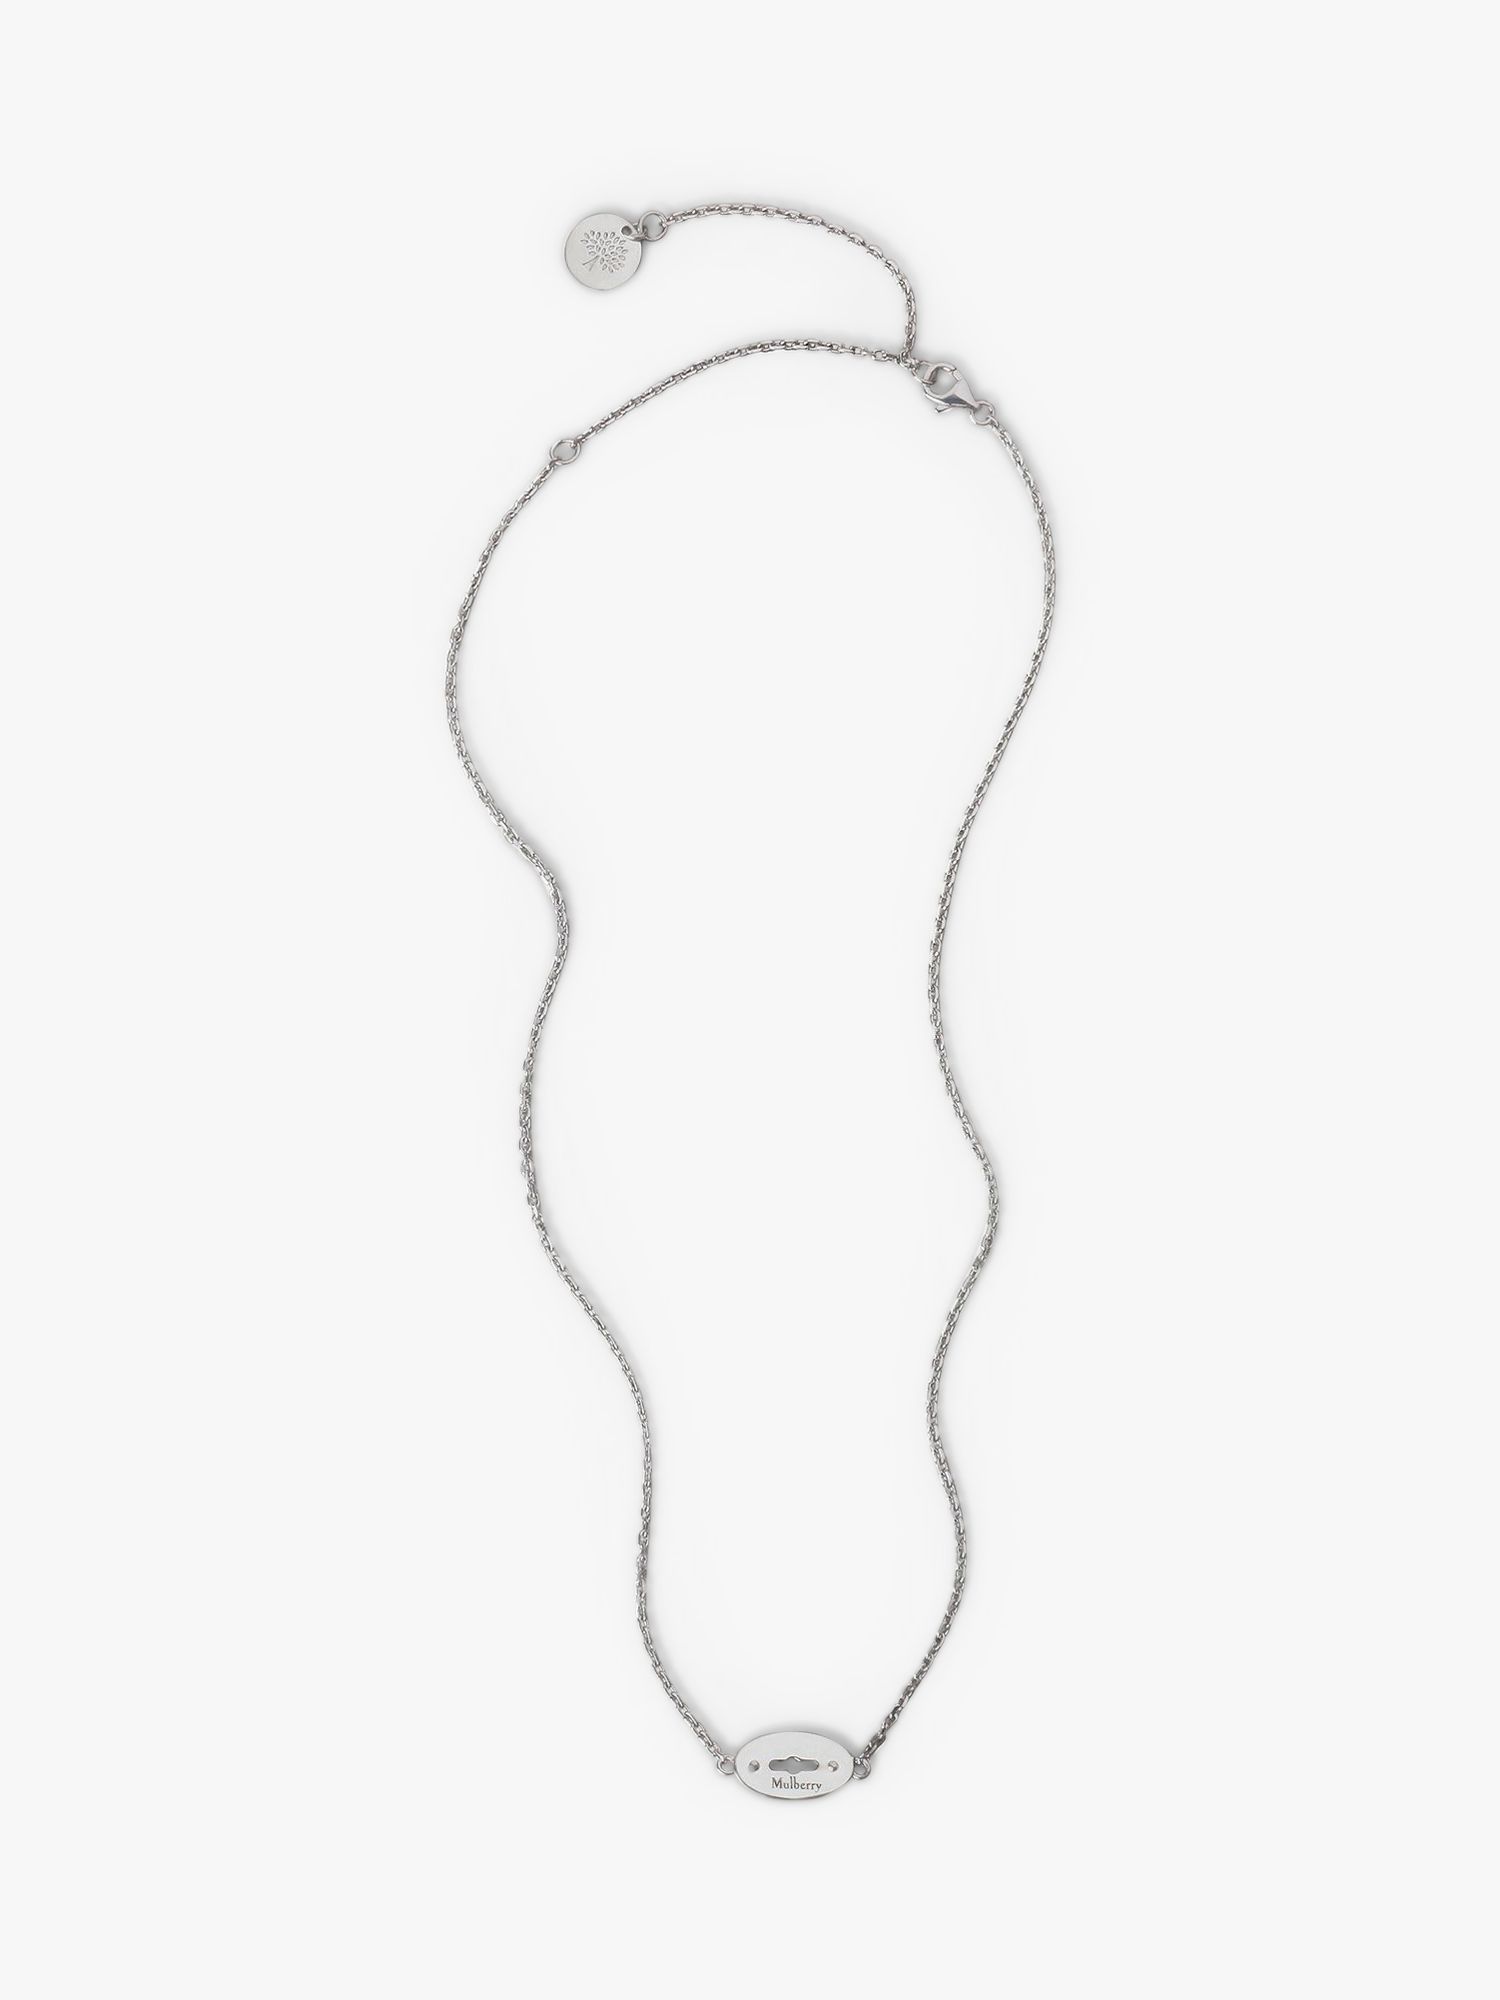 Mulberry Bayswater Necklace, Silver at John Lewis & Partners